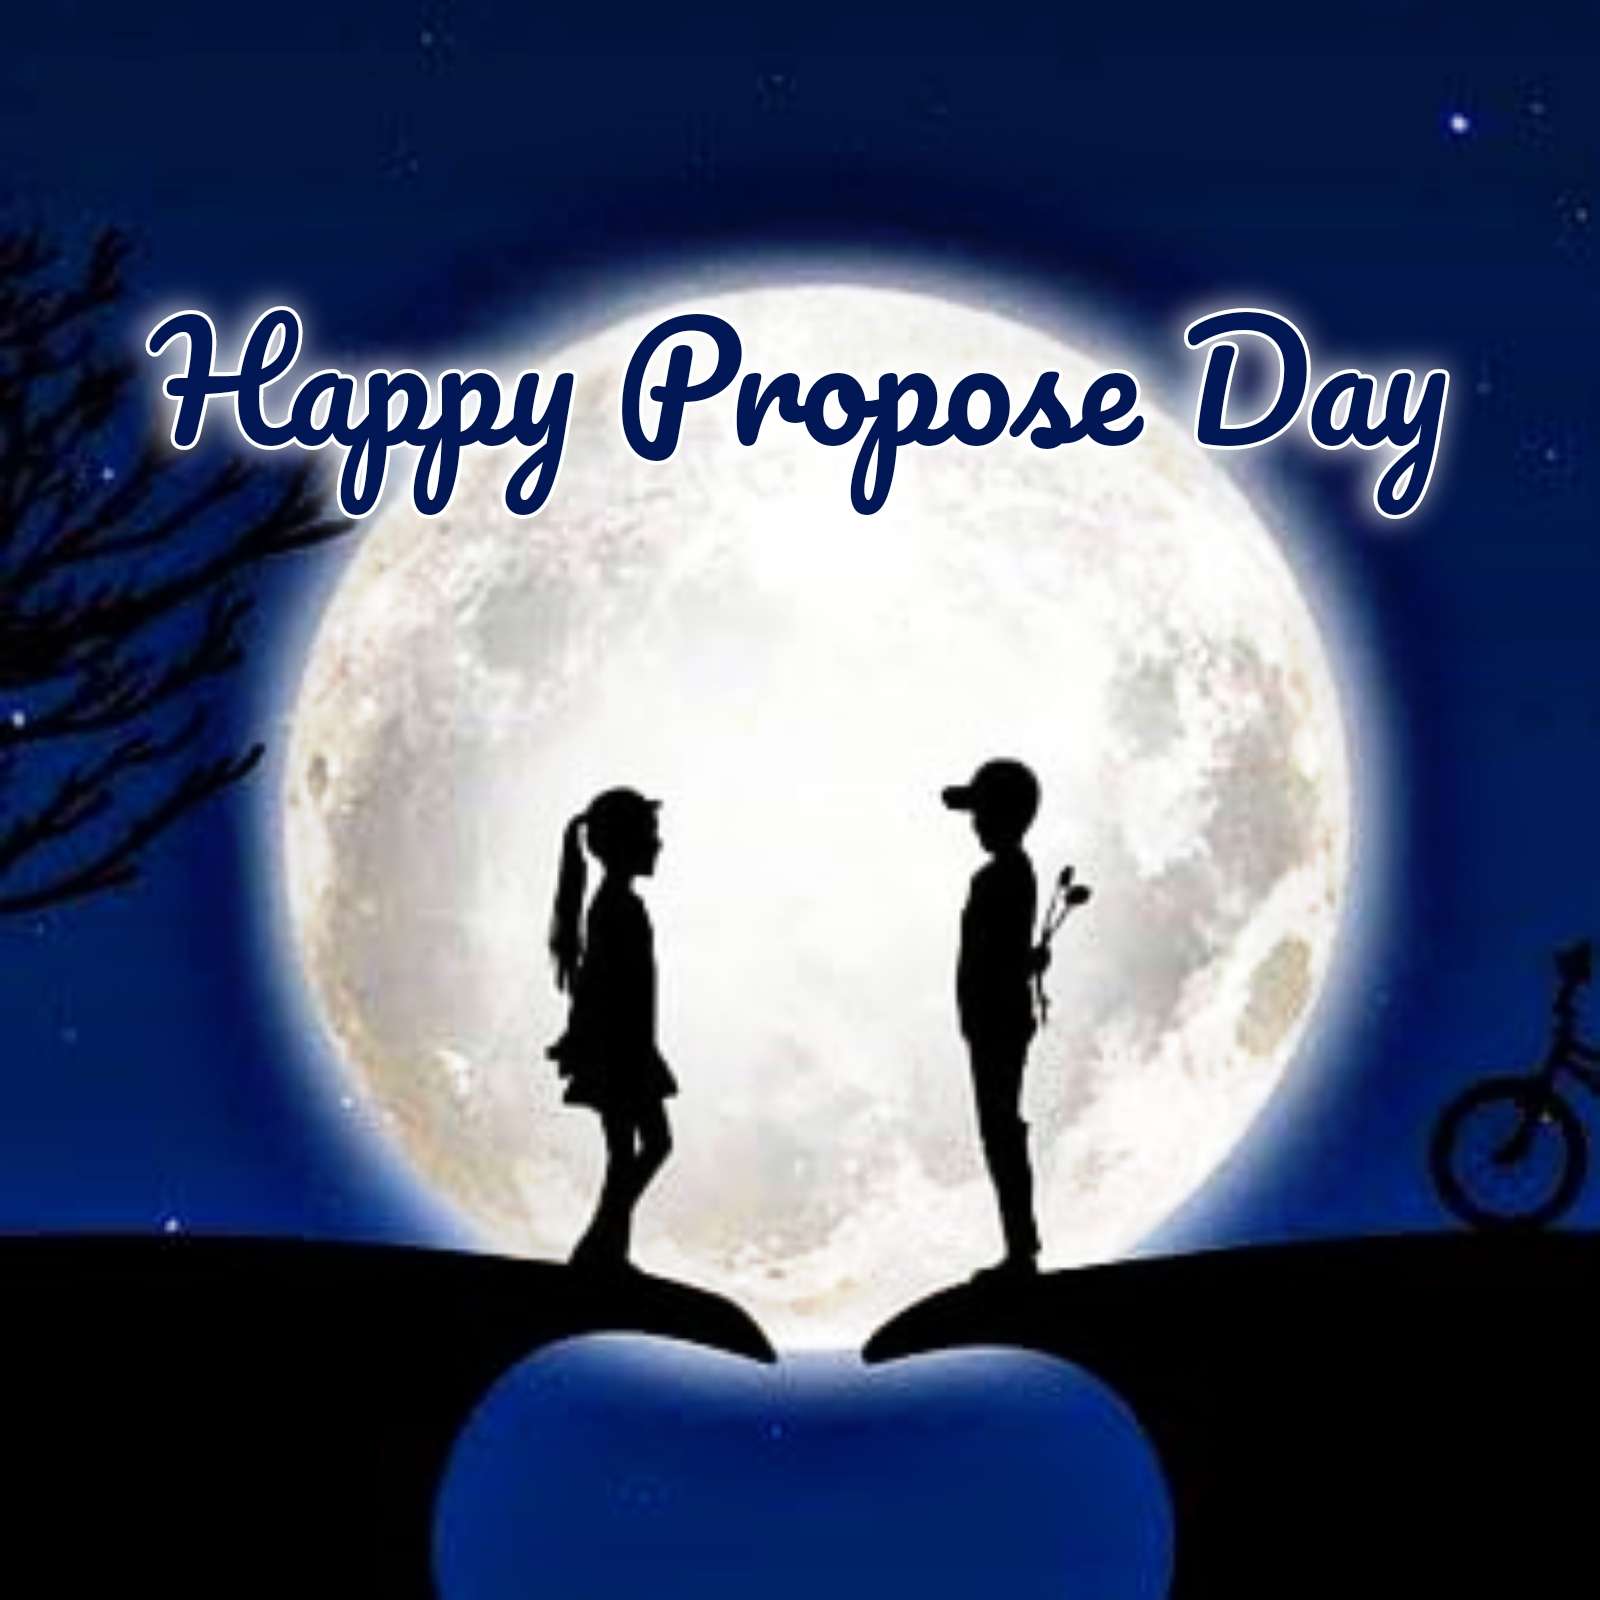 Download Valentine day dates for love  Propose day wallpapers For Mobile  Phone